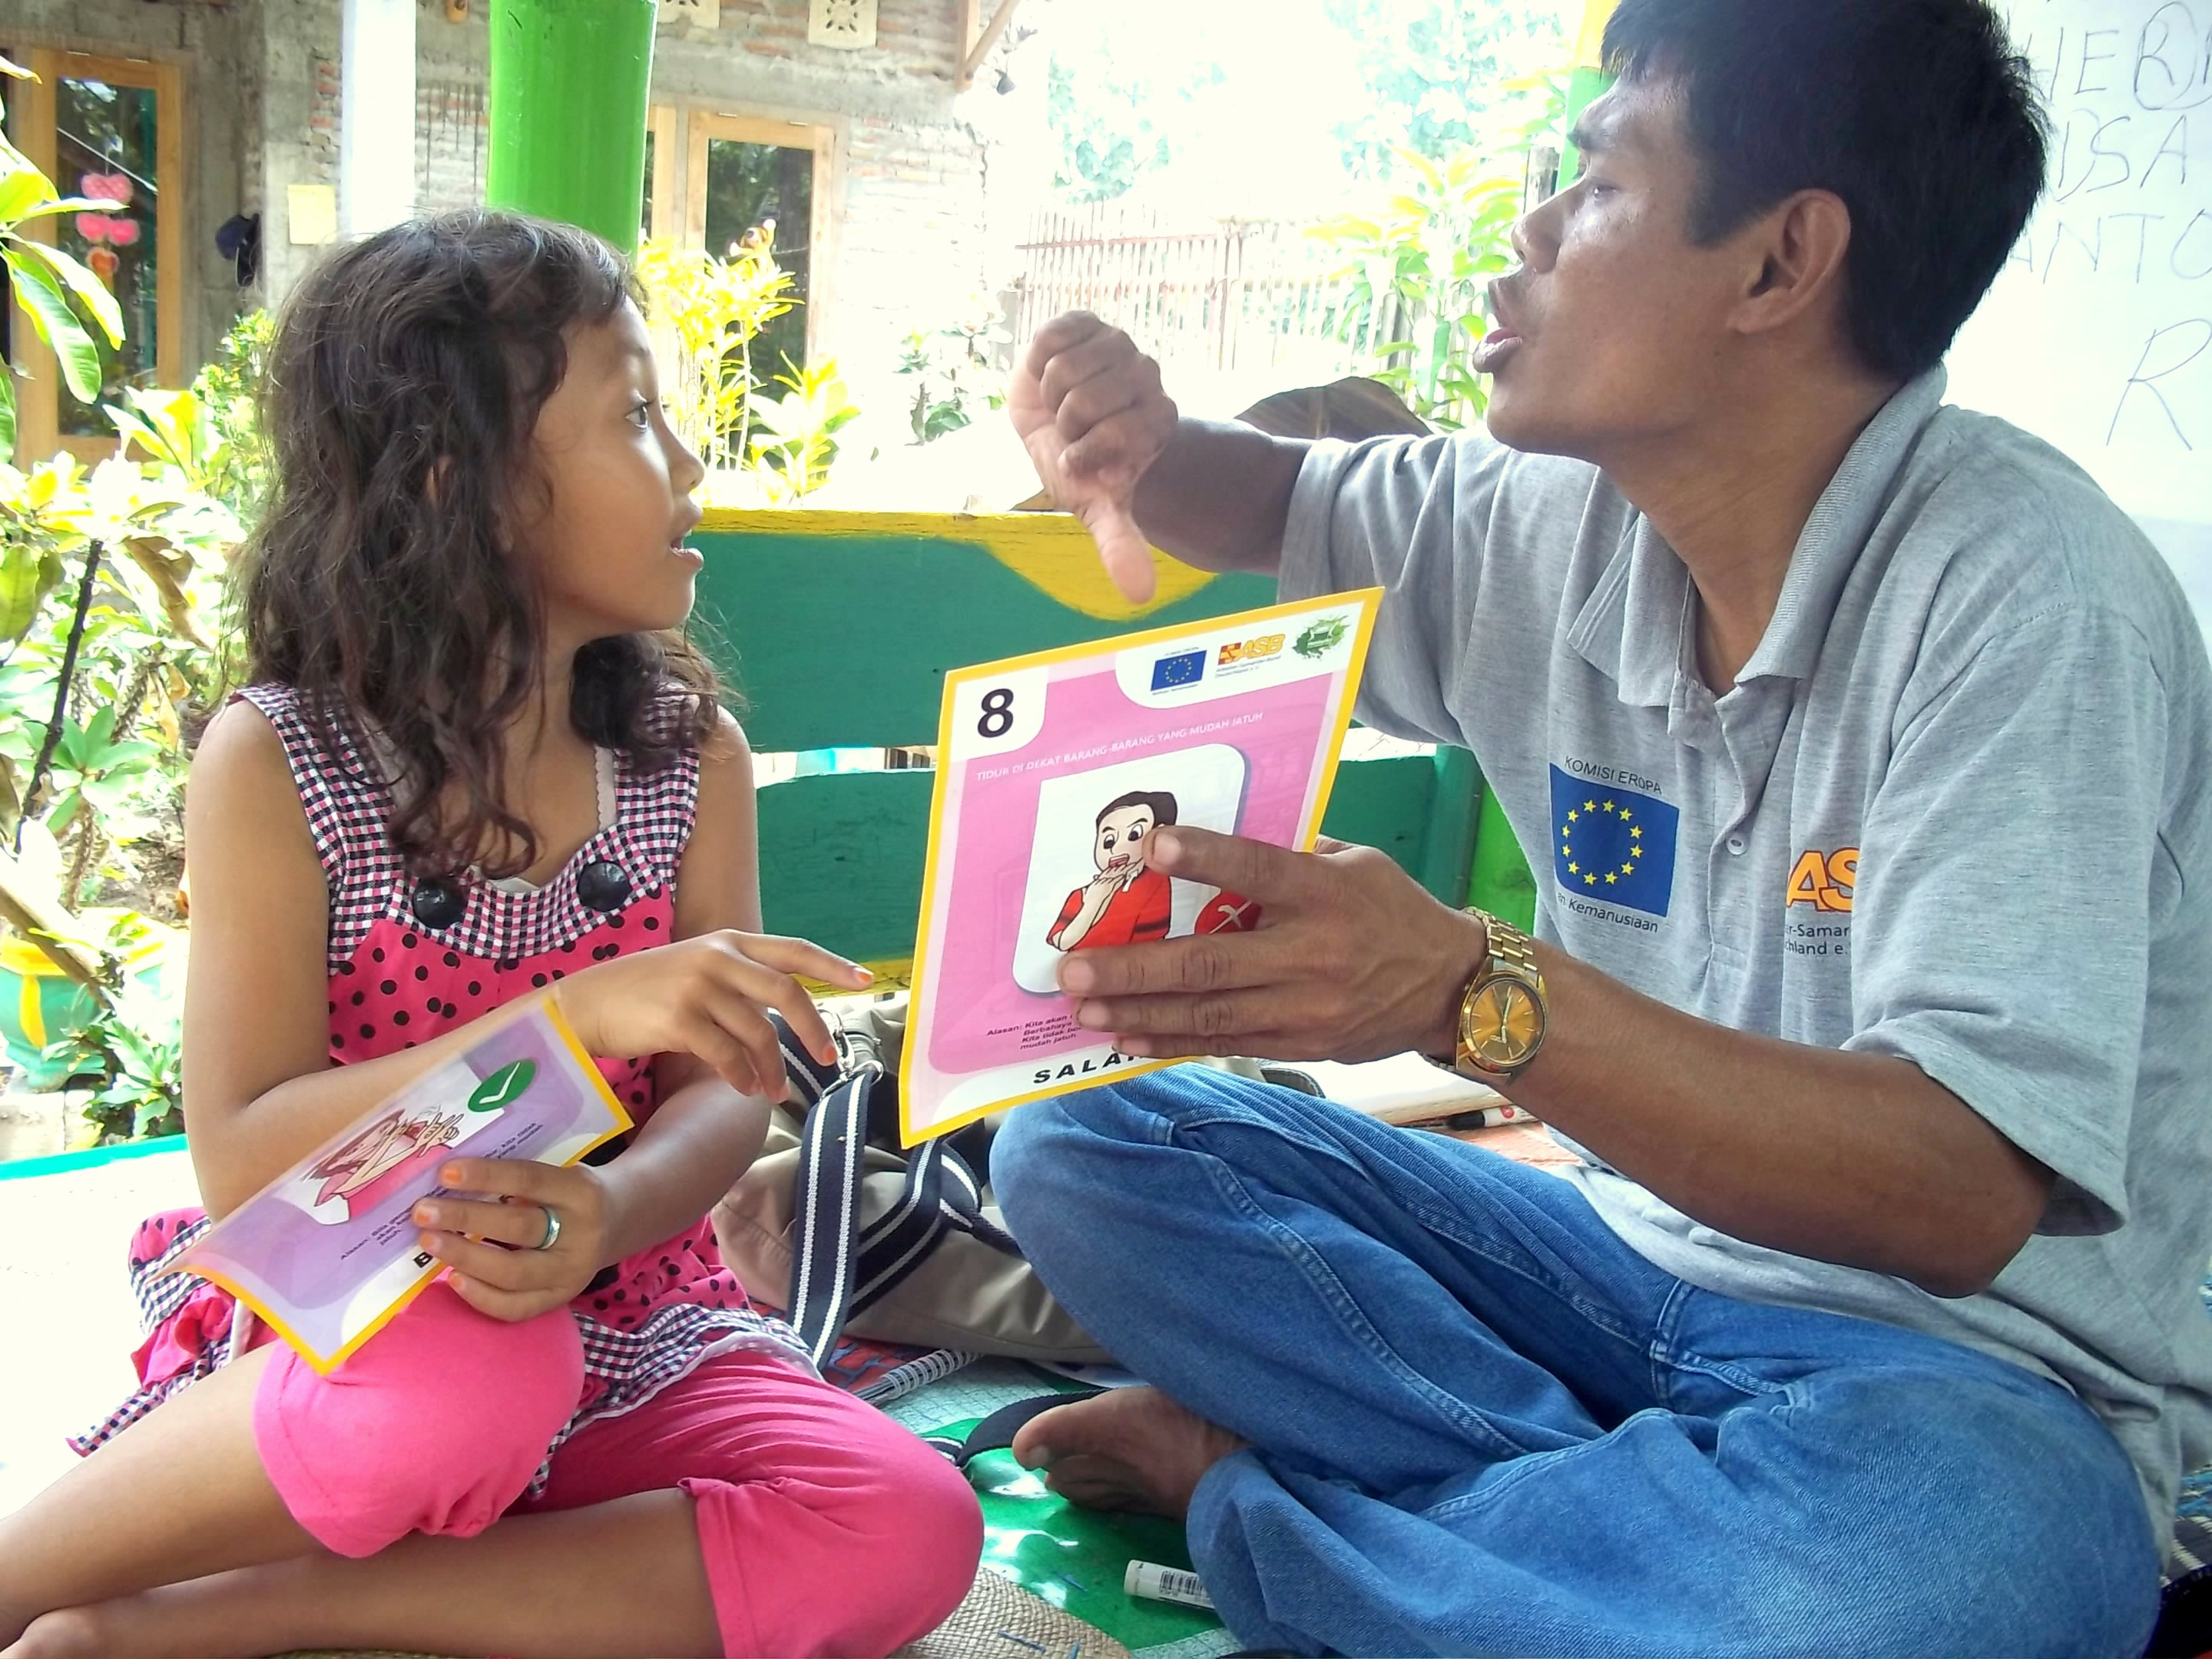 Speech therapy.^[[Image](https://www.flickr.com/photos/eu_echo/8079181602) by [EU Civil Protection and Humanitarian Aid Operations](https://www.flickr.com/photos/eu_echo/) is licensed under [CC BY-SA 2.0](https://creativecommons.org/licenses/by-sa/2.0/)]